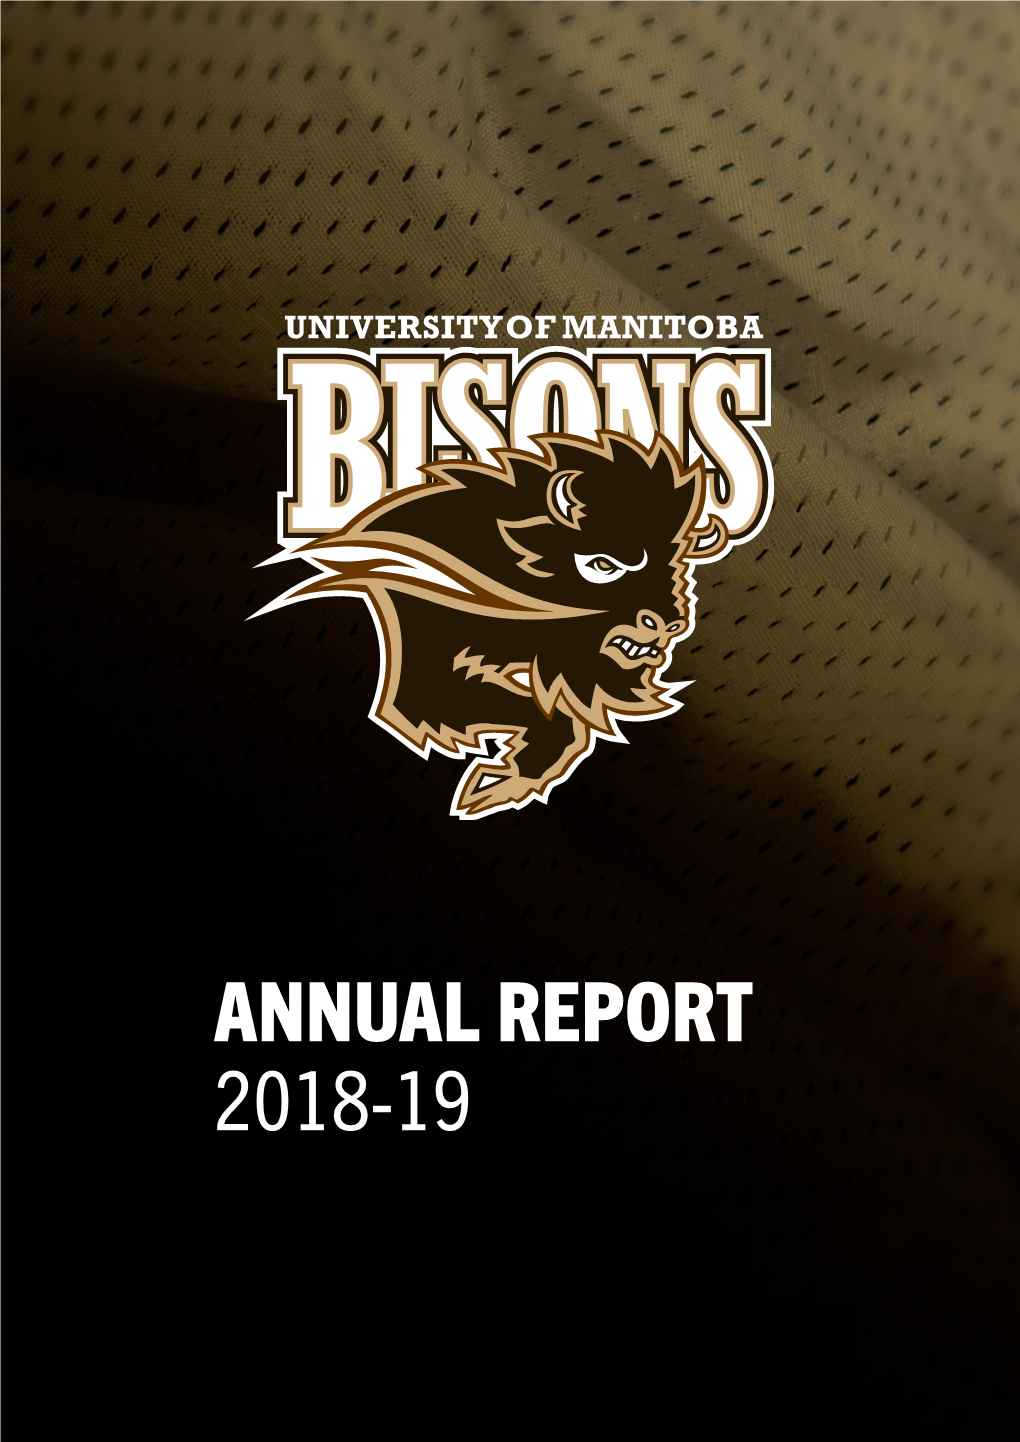 Annual Report 2018-19 Contents